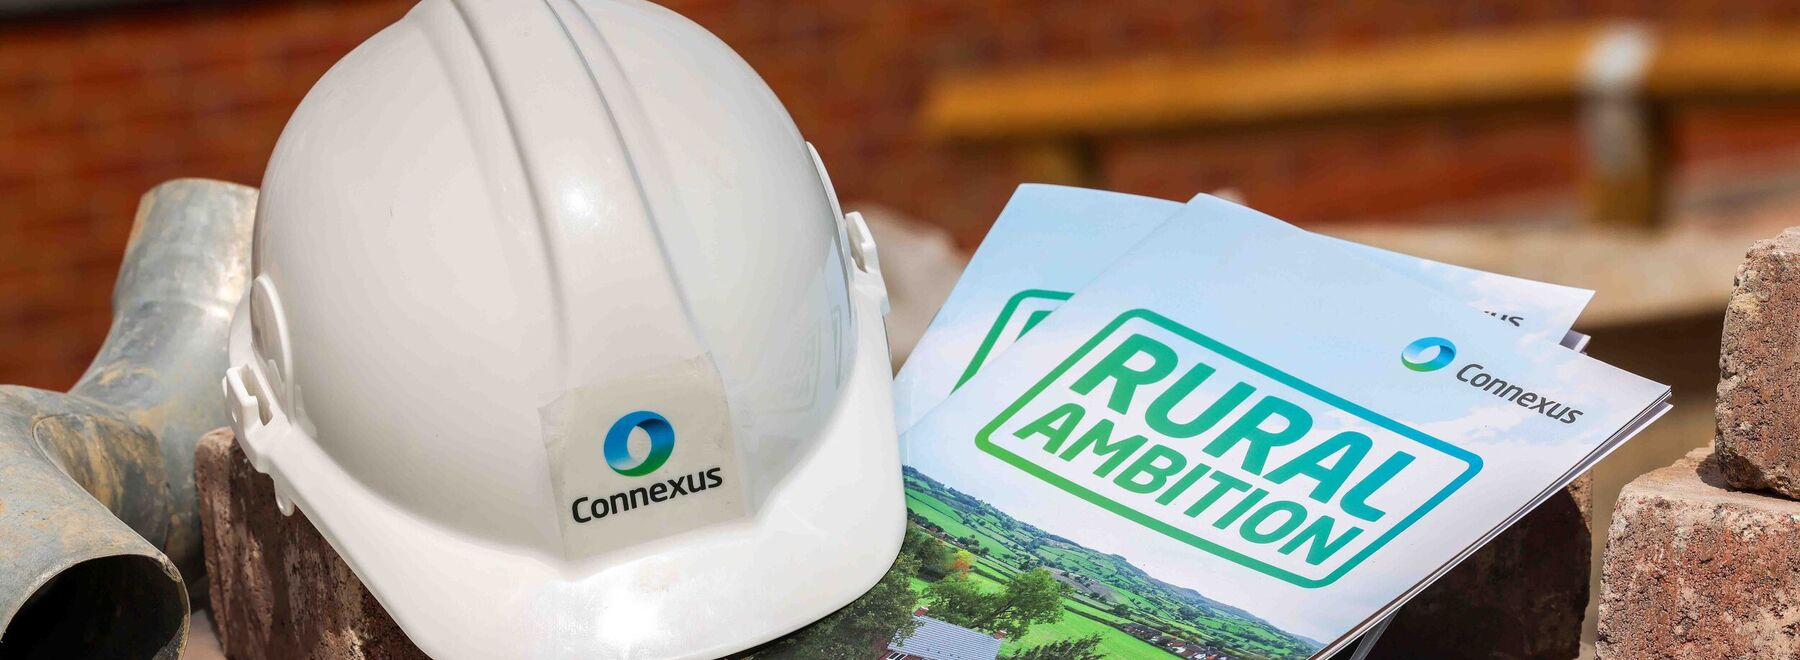 A Connexus hard hat and copies of Rural Ambition 